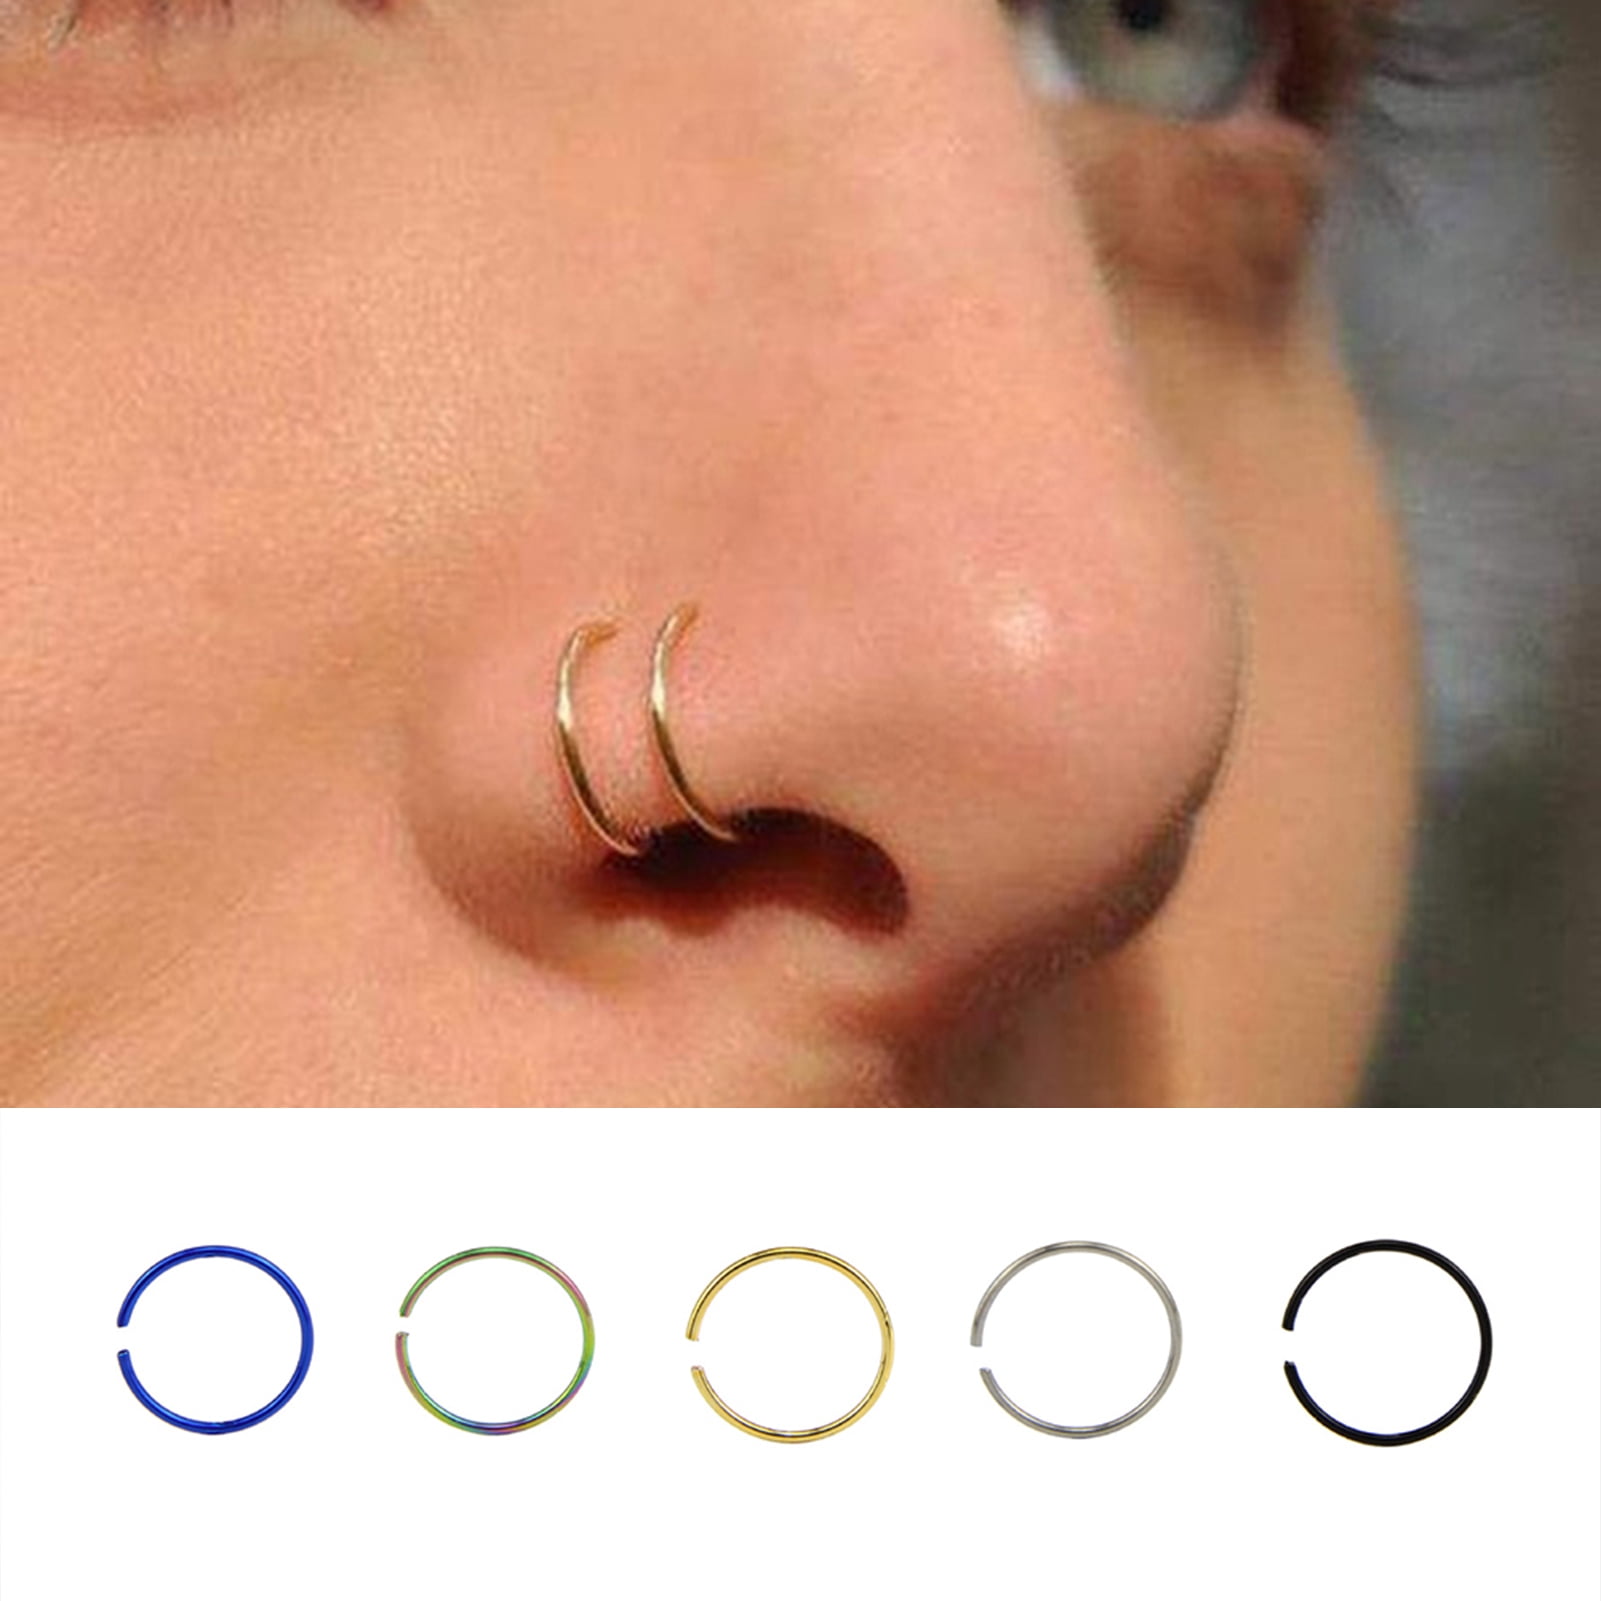 Amazon.com: 20G 18G 16G Titanium Nose Ring Hoop, Cartilage Hoop Earrings  for Women Men Silver Gold Nose Ring Septum Ring Tragus Conch Helix Daith  Lip Piercing Jewelry 6mm/7mm/8mm/9mm/10mm (Gold-16g, 9mm) : Handmade